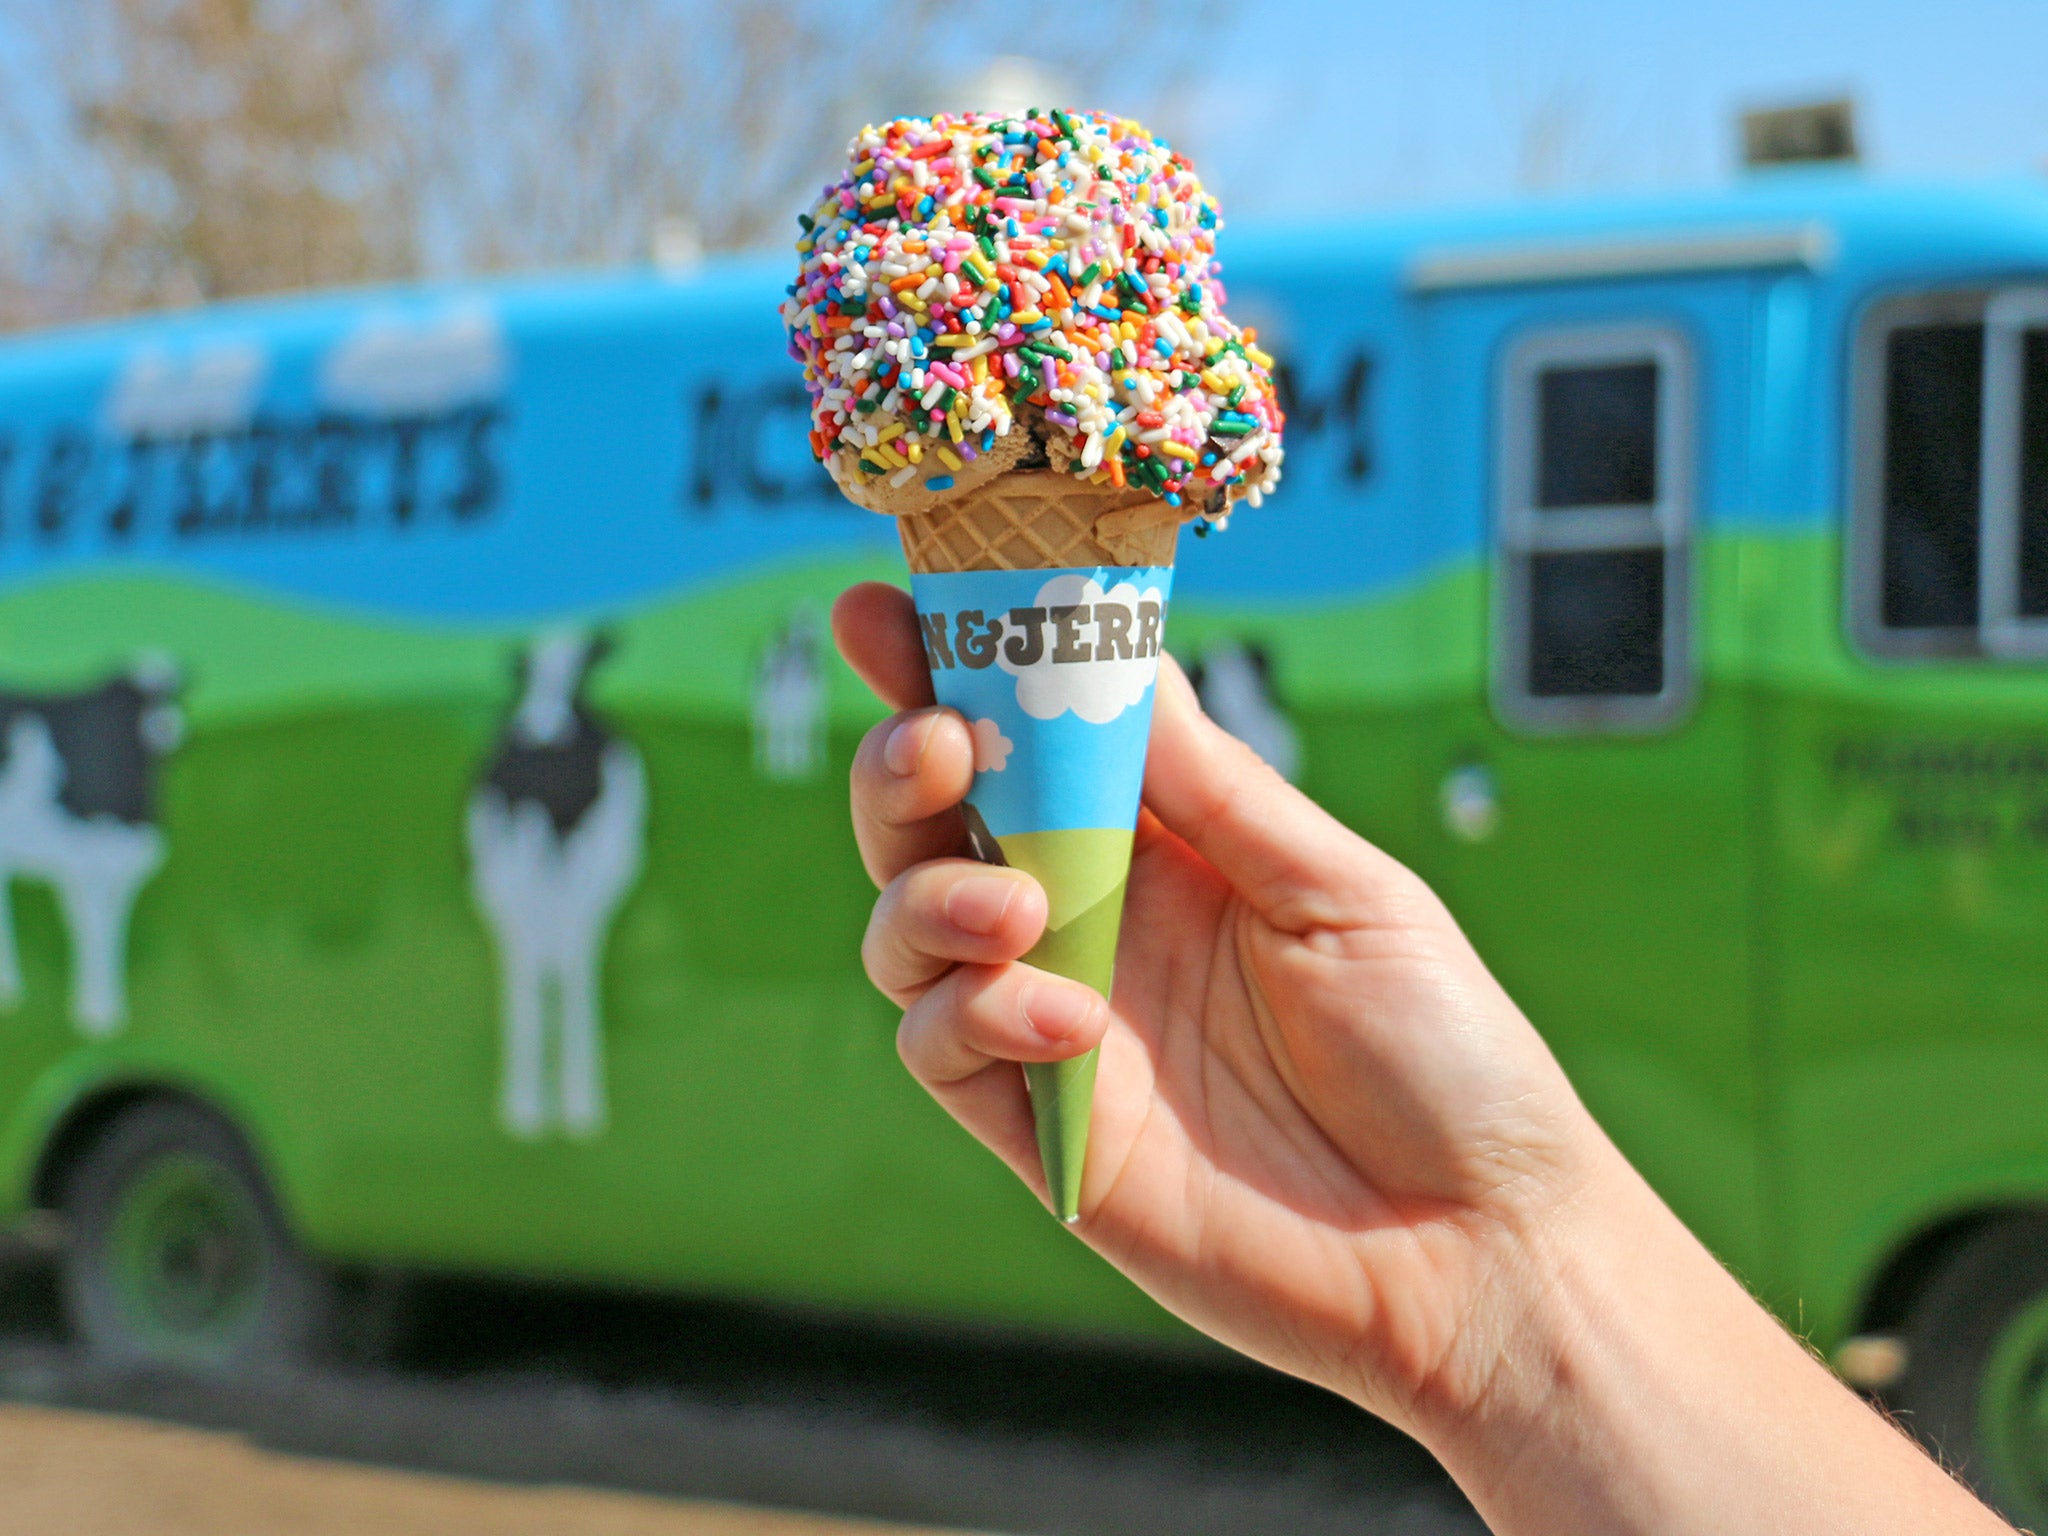 Ben & Jerry’s distributed more than a million free cones during last year's event